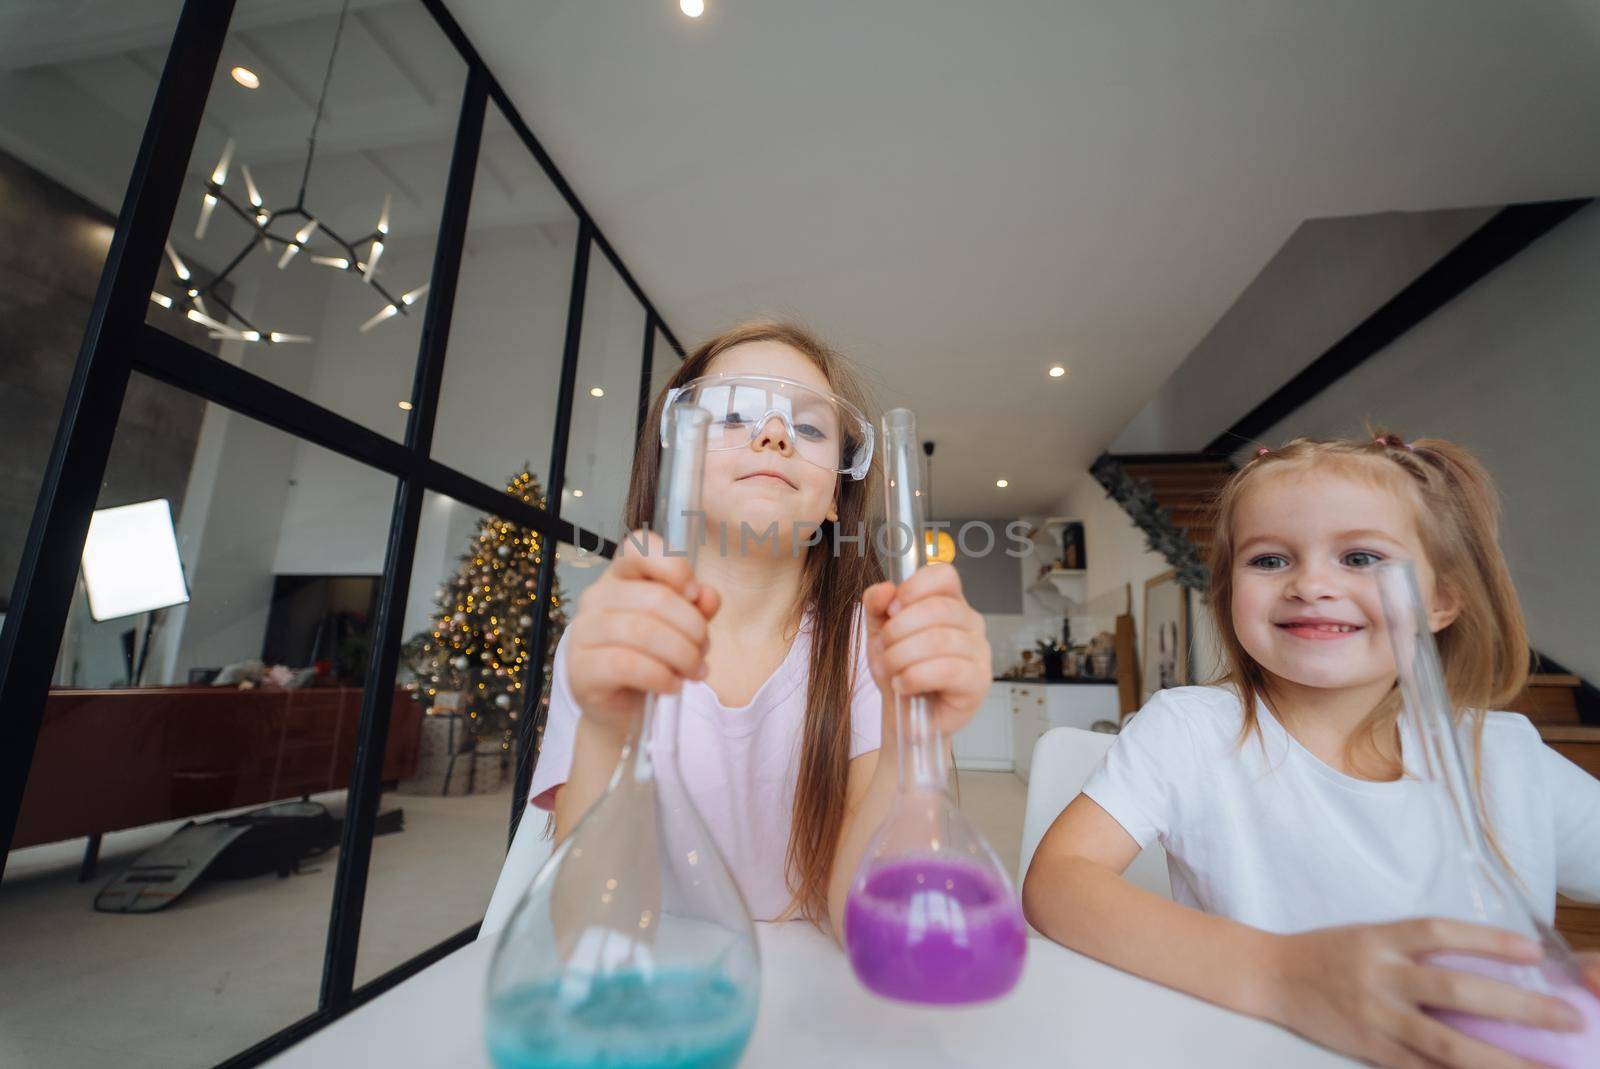 Girls making chemical experiments at home, close view.